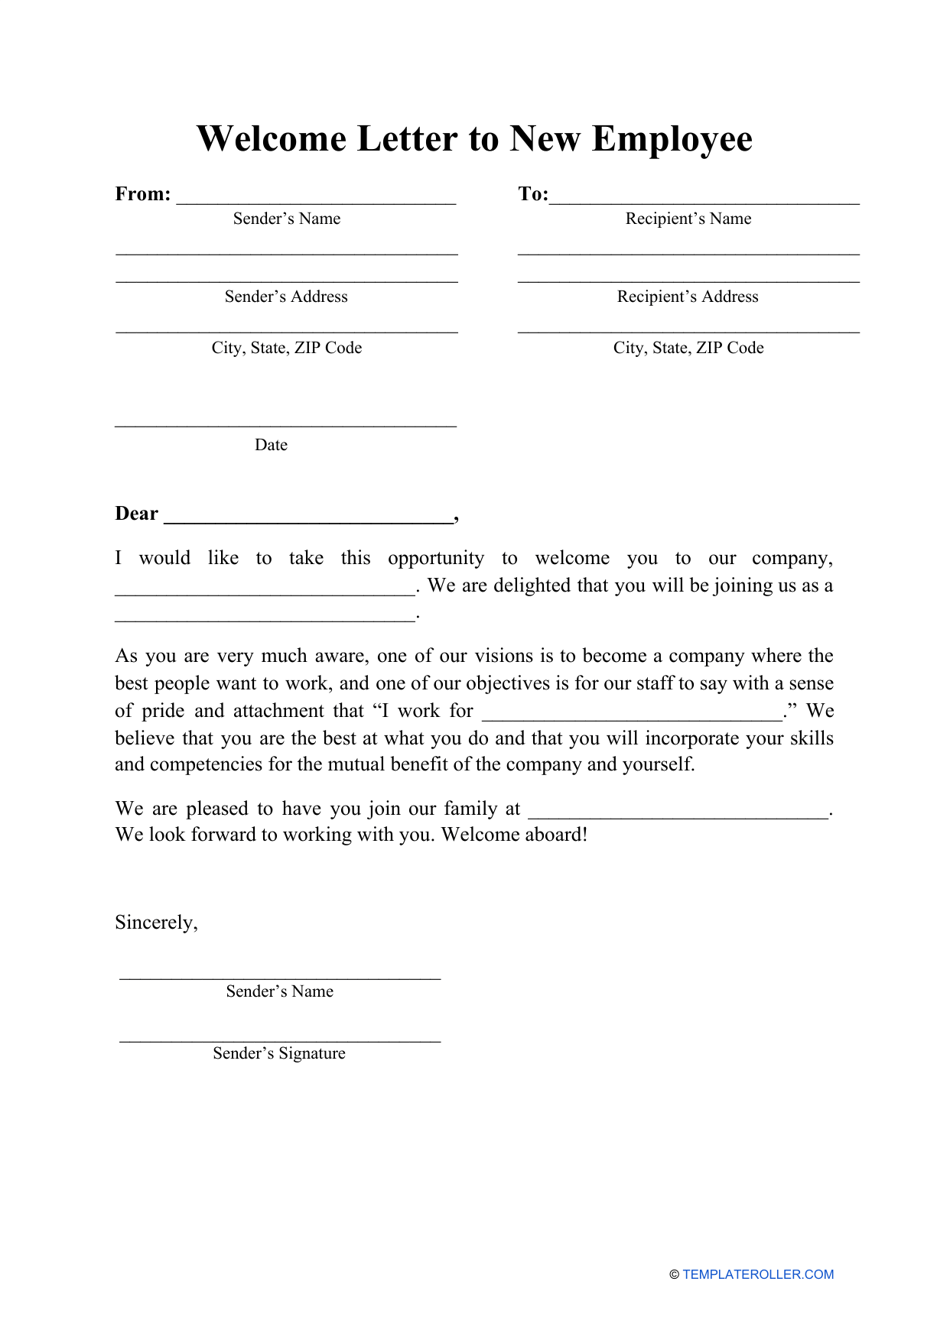 Welcome Letter Template For New Employee